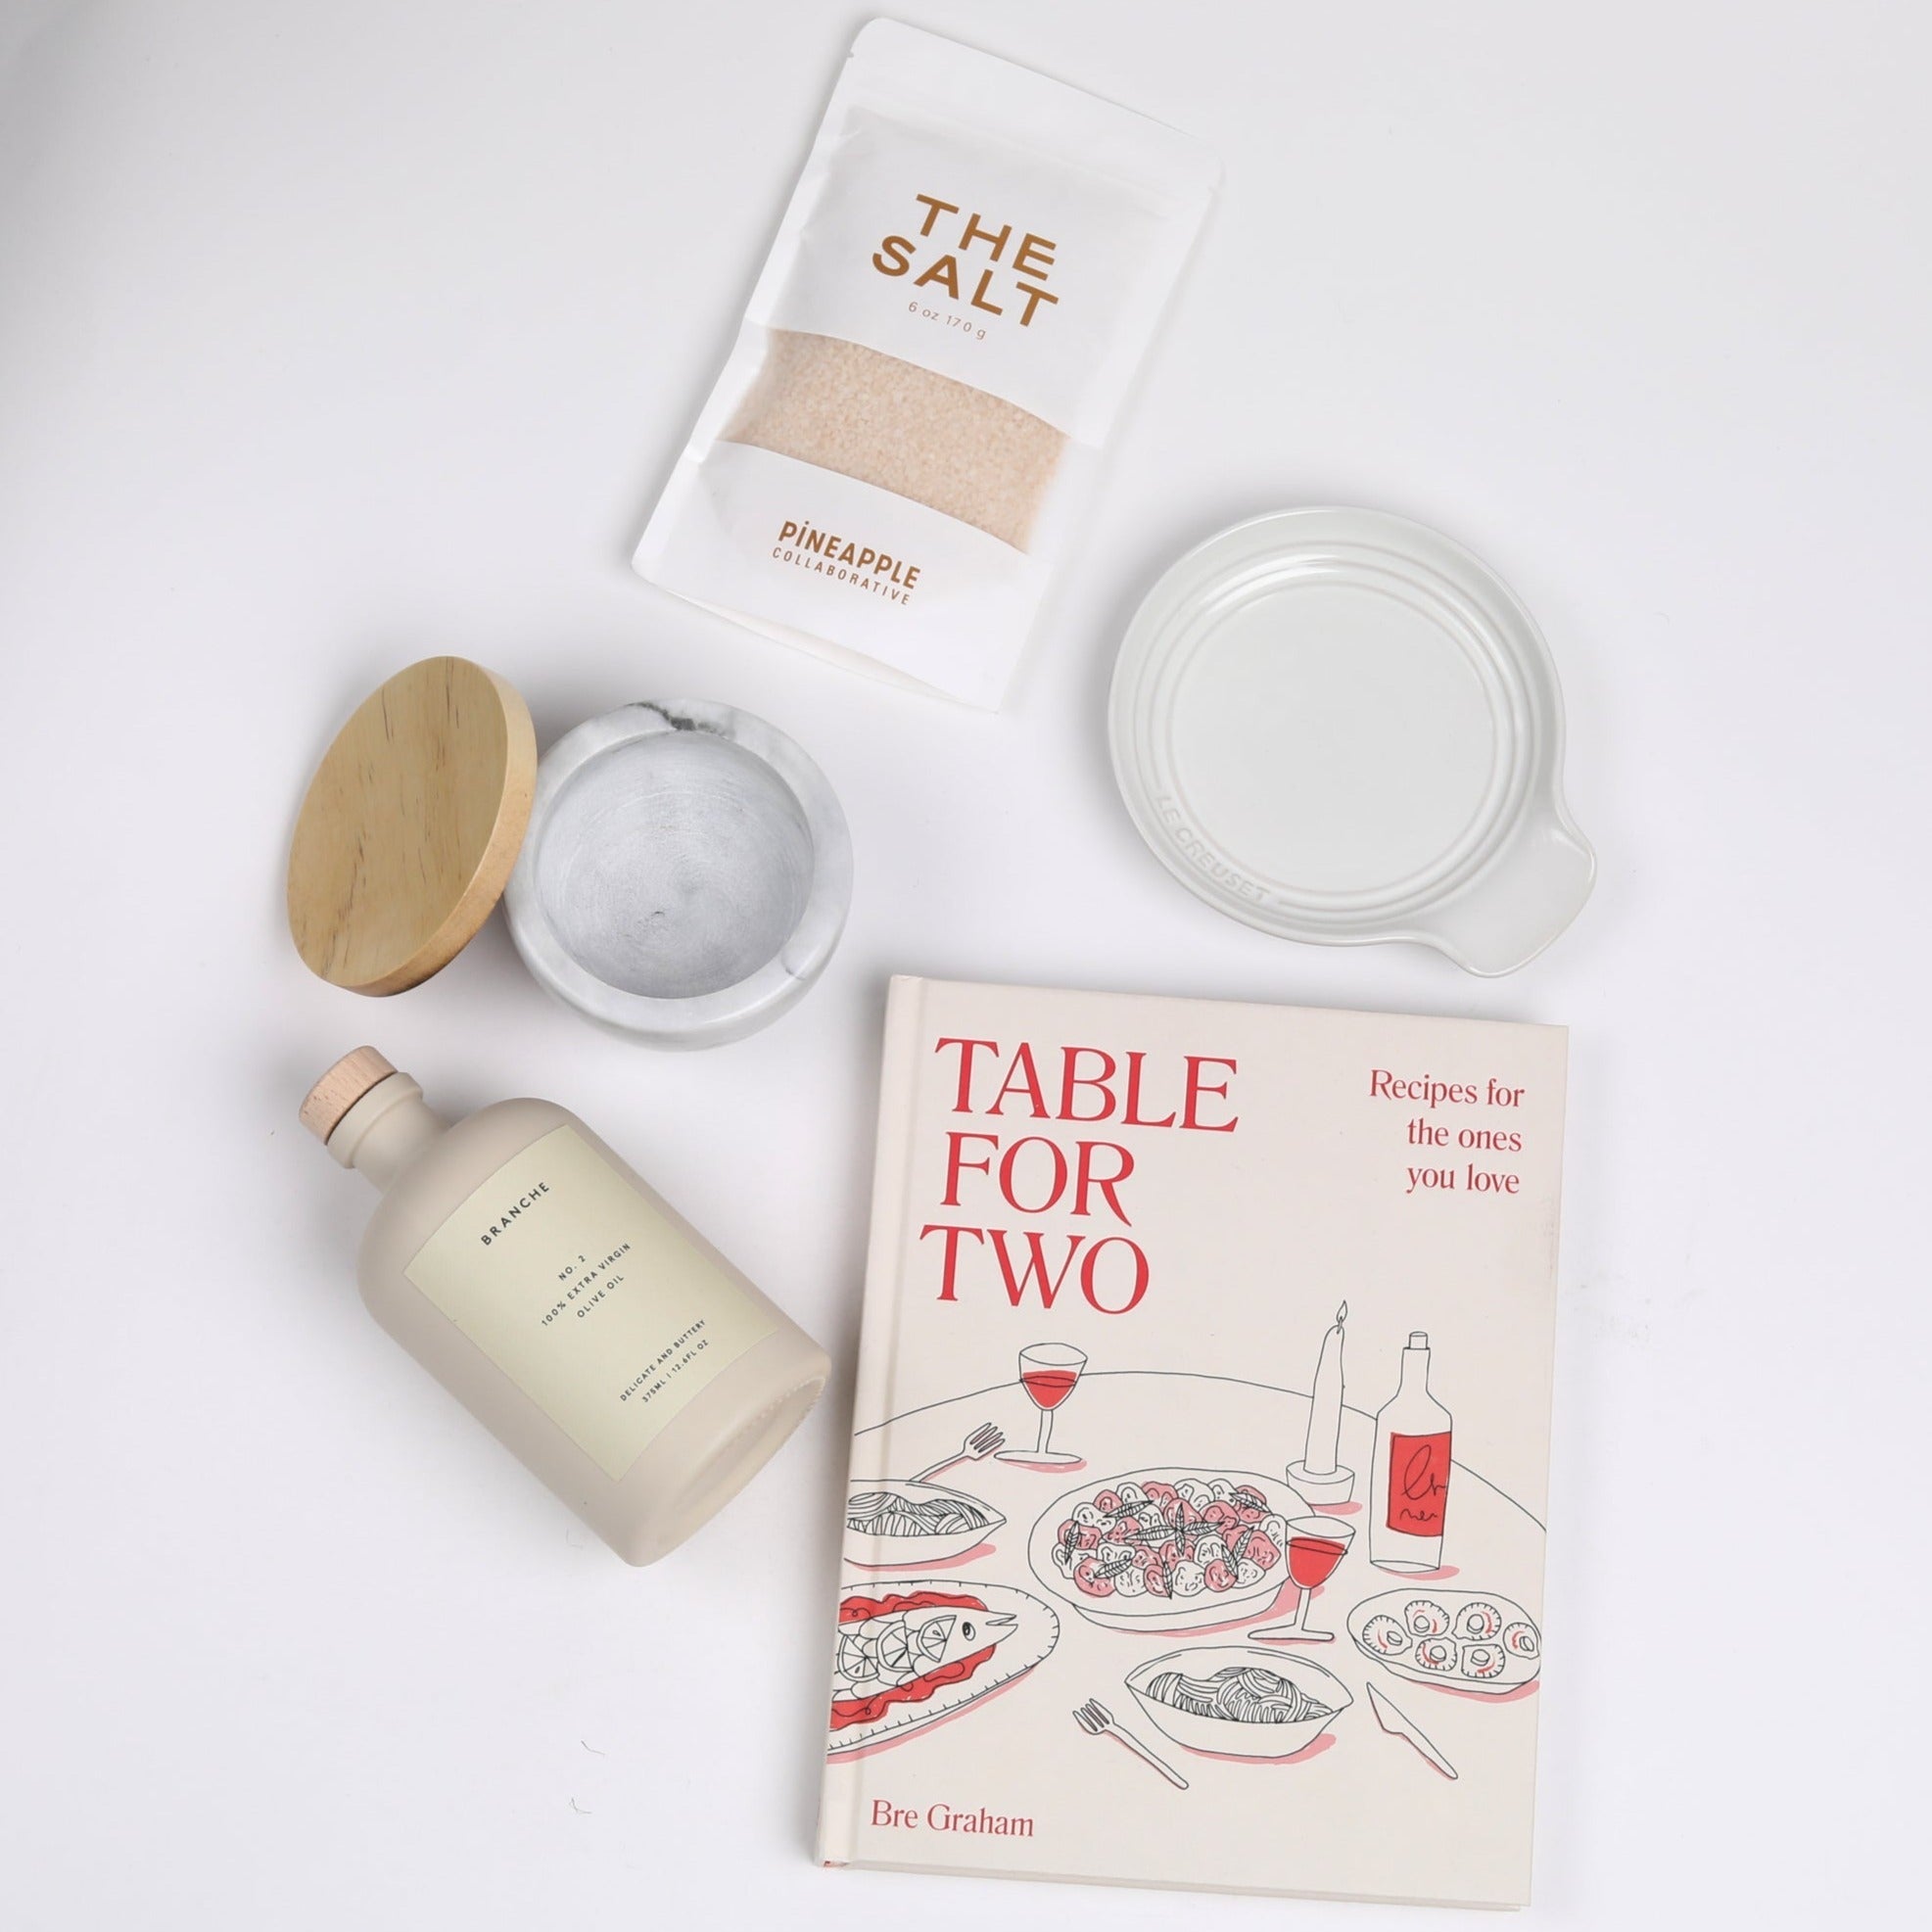 Table for Two ready to ship products including "Table for Two" cookbook, Le Creuset spoon rest, Branche olive oil, The Salt, and marble salt cellar